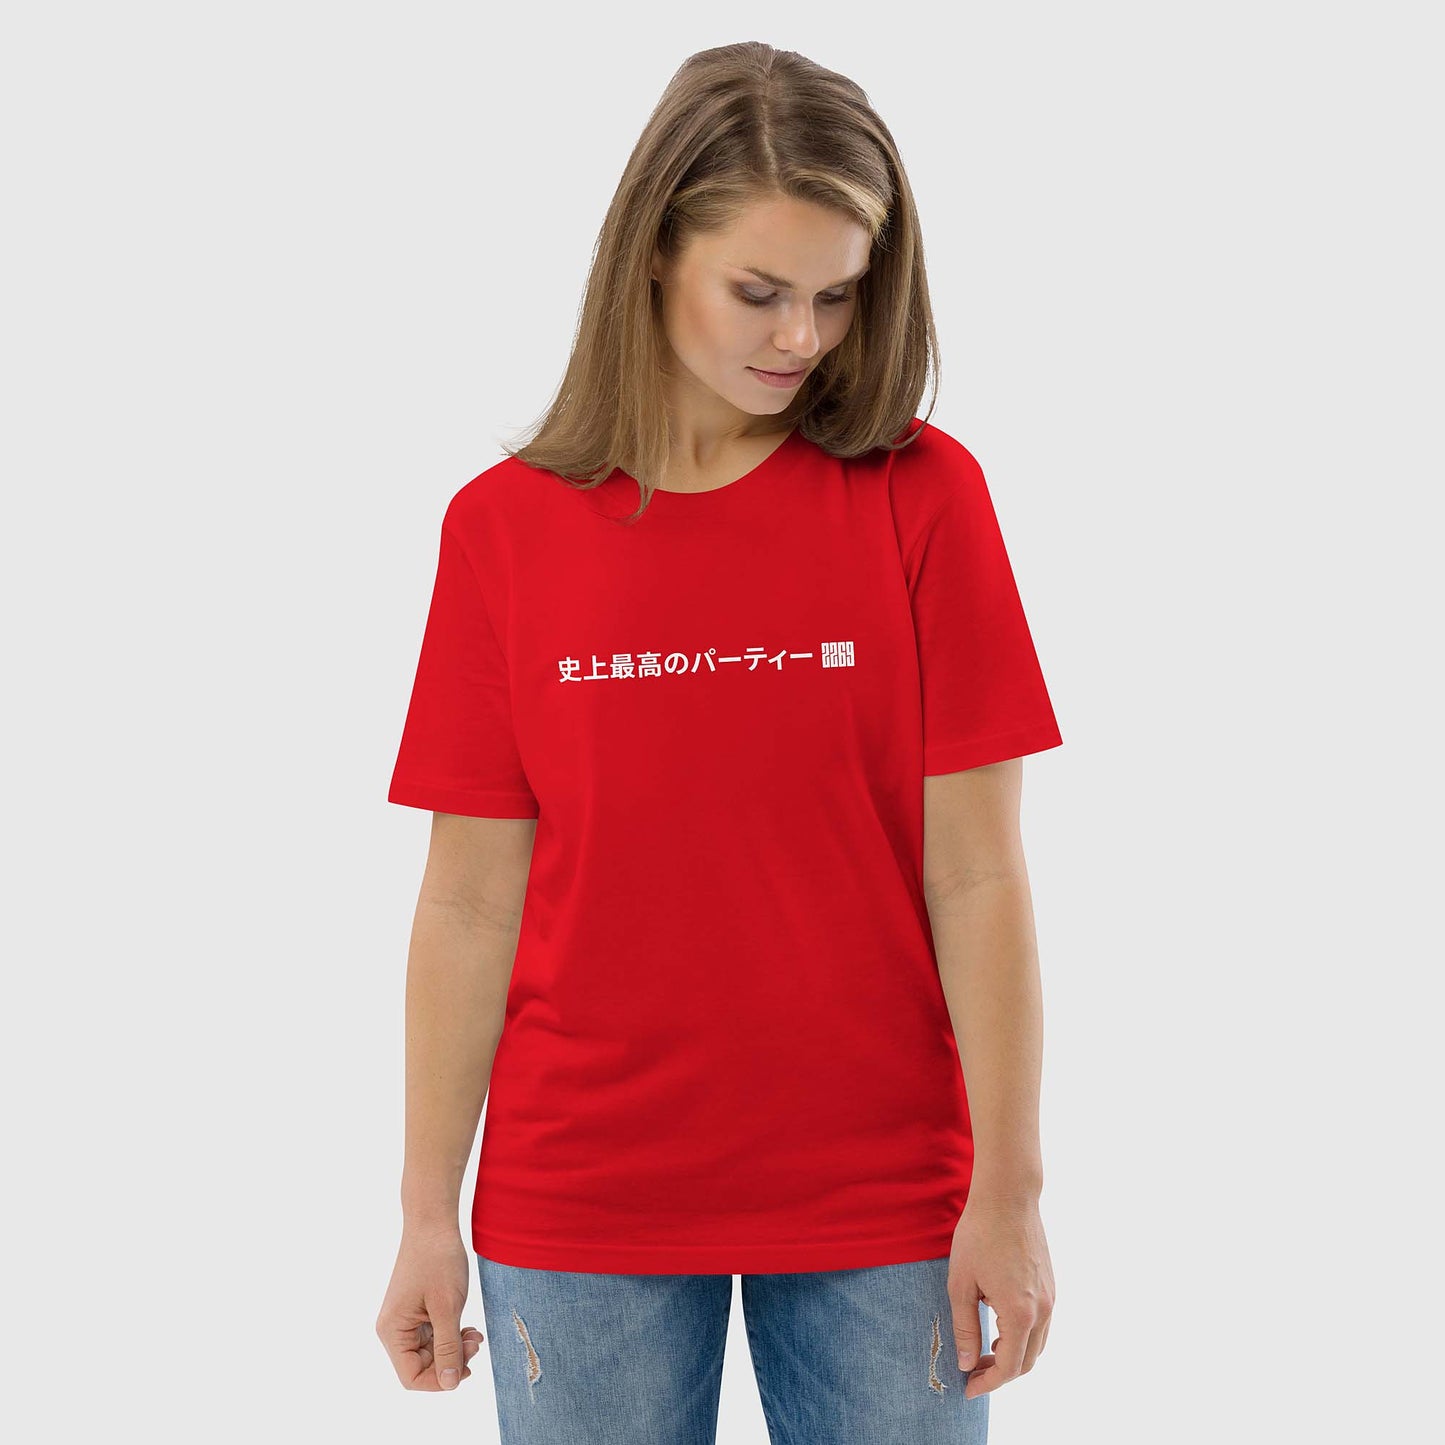 Unisex red organic cotton t-shirt with Japanese 2269 party message